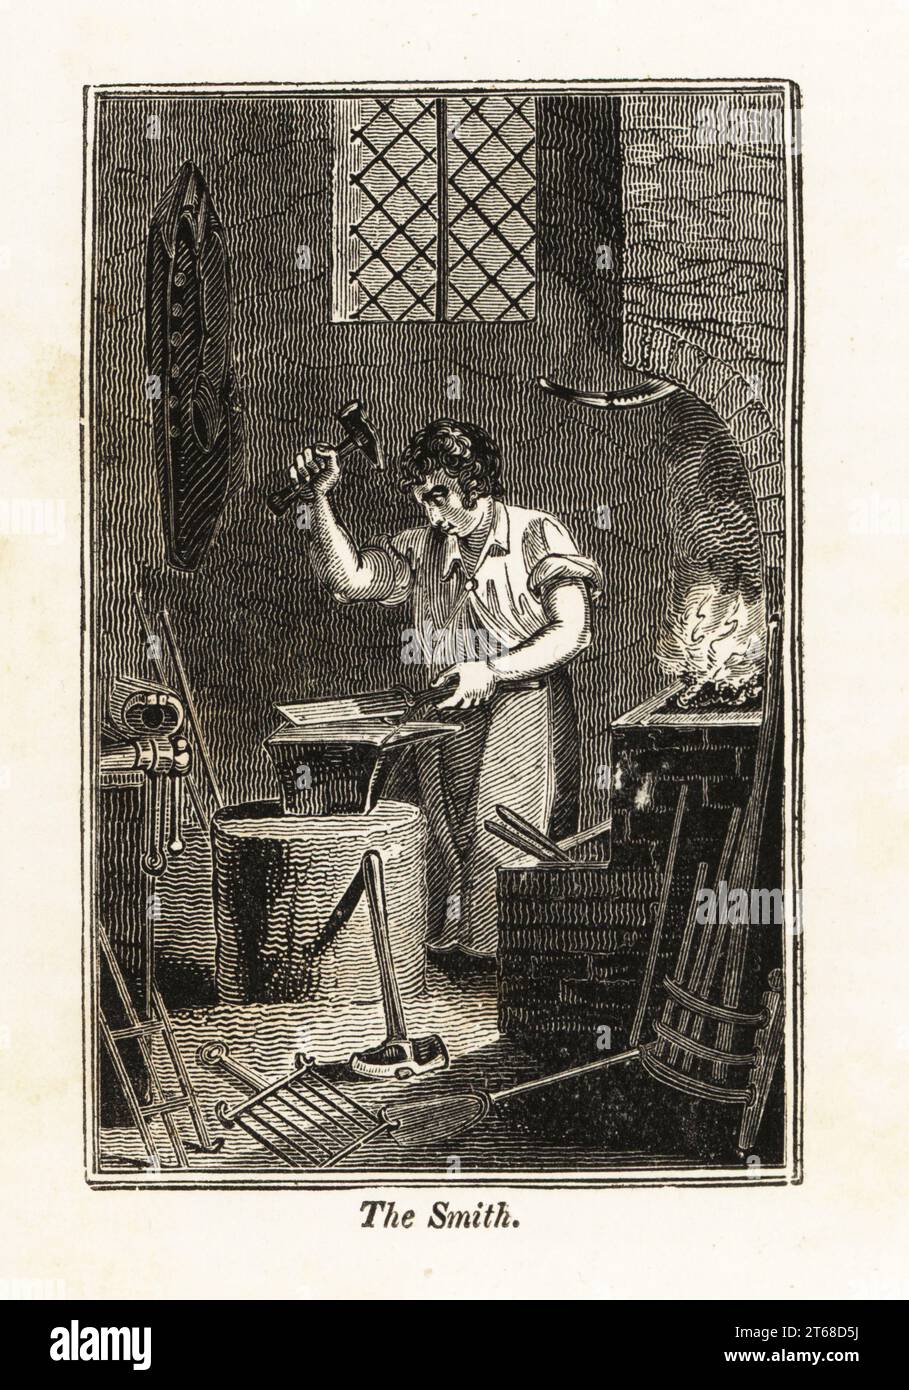 Blacksmith hammering metal on an anvil in a smithy. Tools including mallet and tongs in front of the brick forge, and wrought iron products and railings on the floor. Woodblock engraving from The Book of English Trades, or Library of Useful Arts, F.C.& J. Rivington, London, 1821. Stock Photo